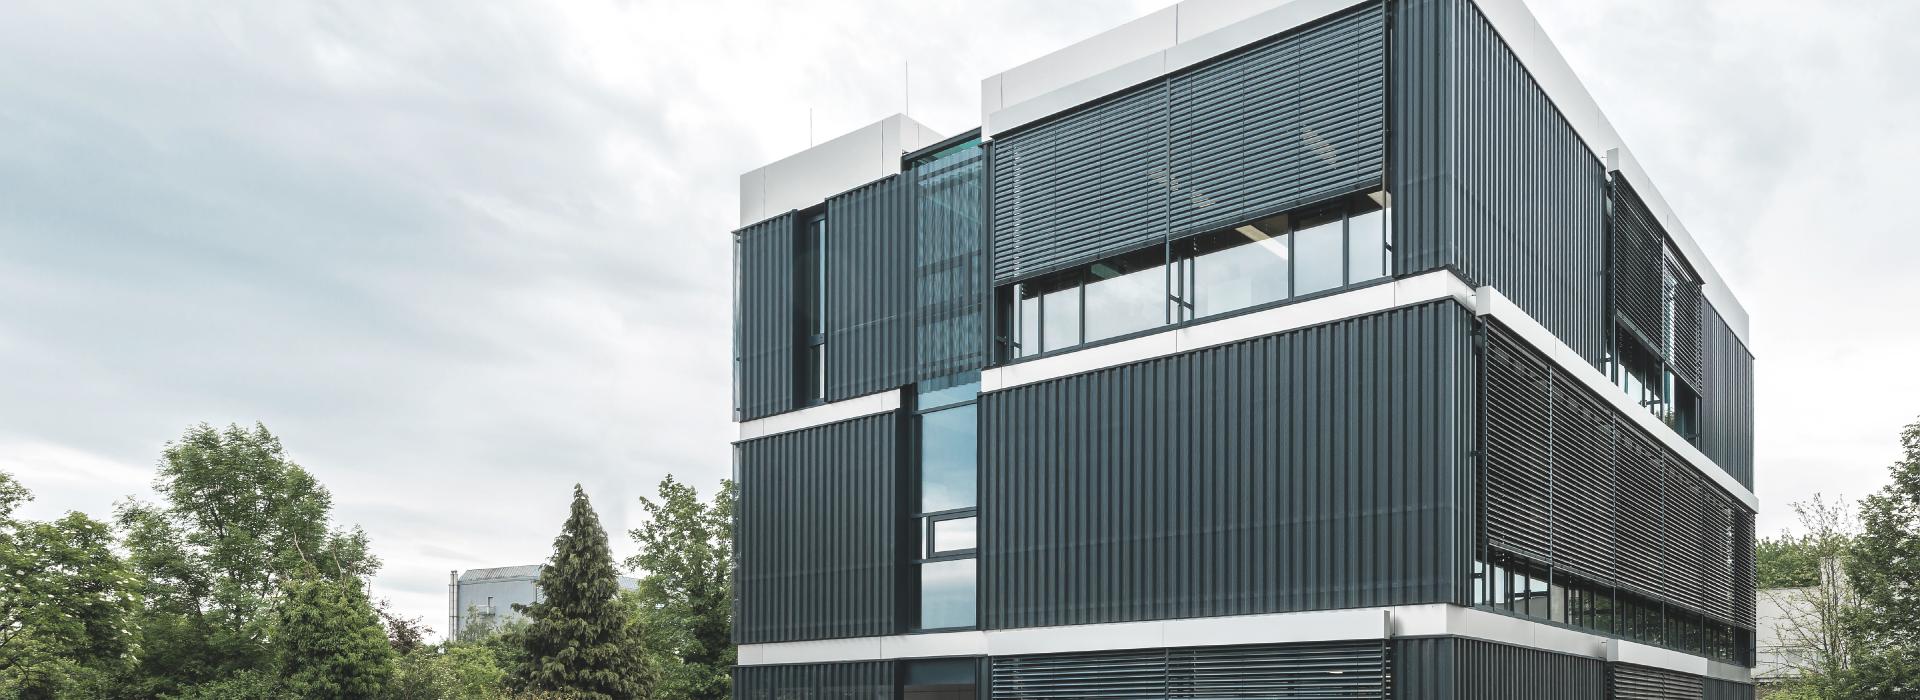 Modern office building with façade venetian blinds by daylight